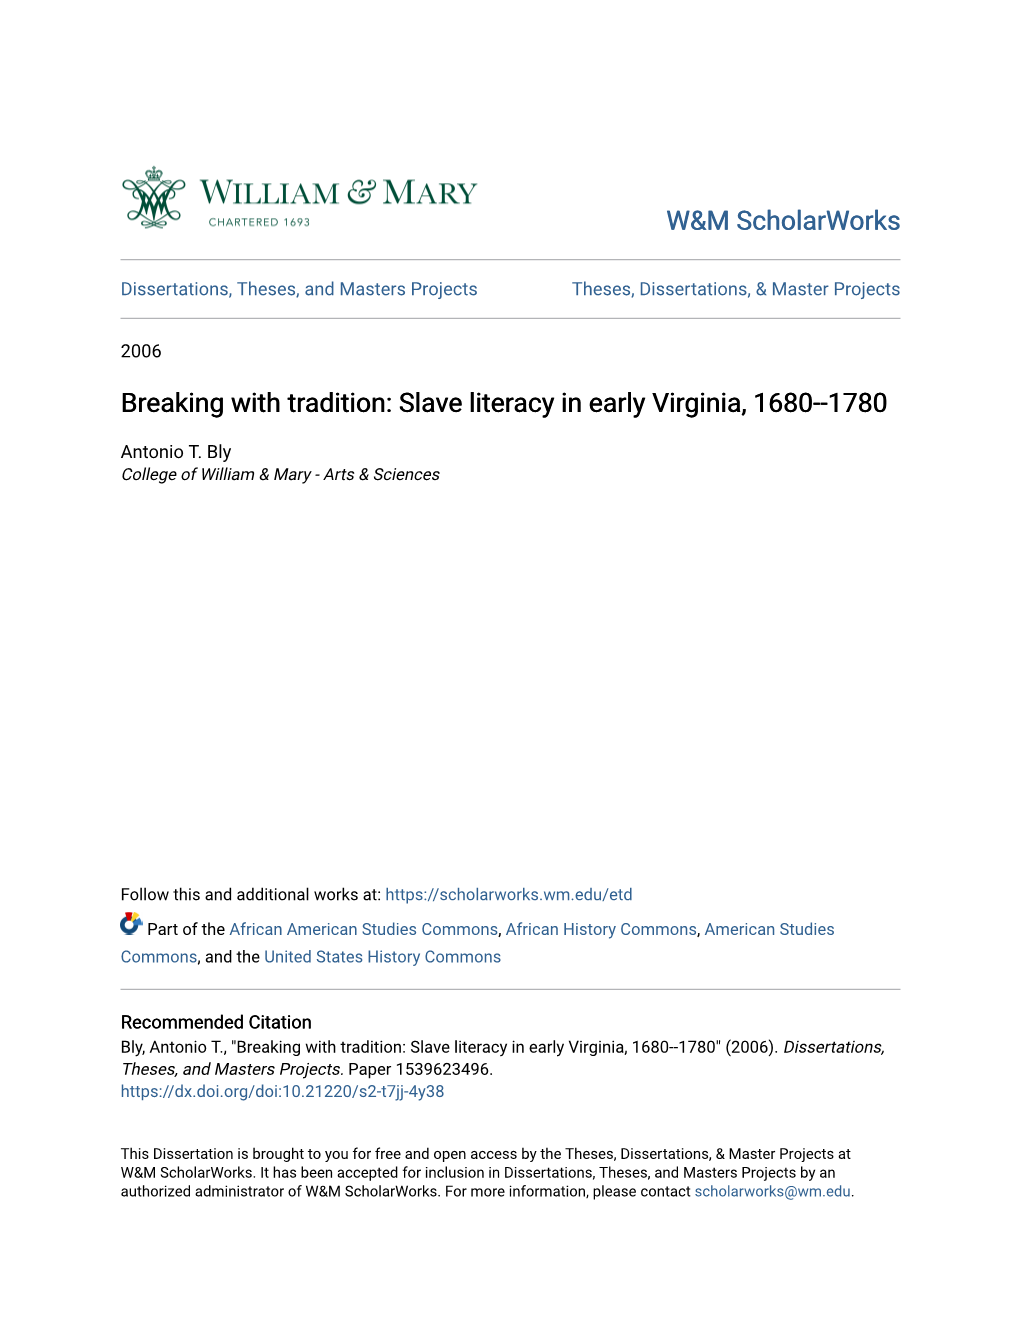 Breaking with Tradition: Slave Literacy in Early Virginia, 1680--1780